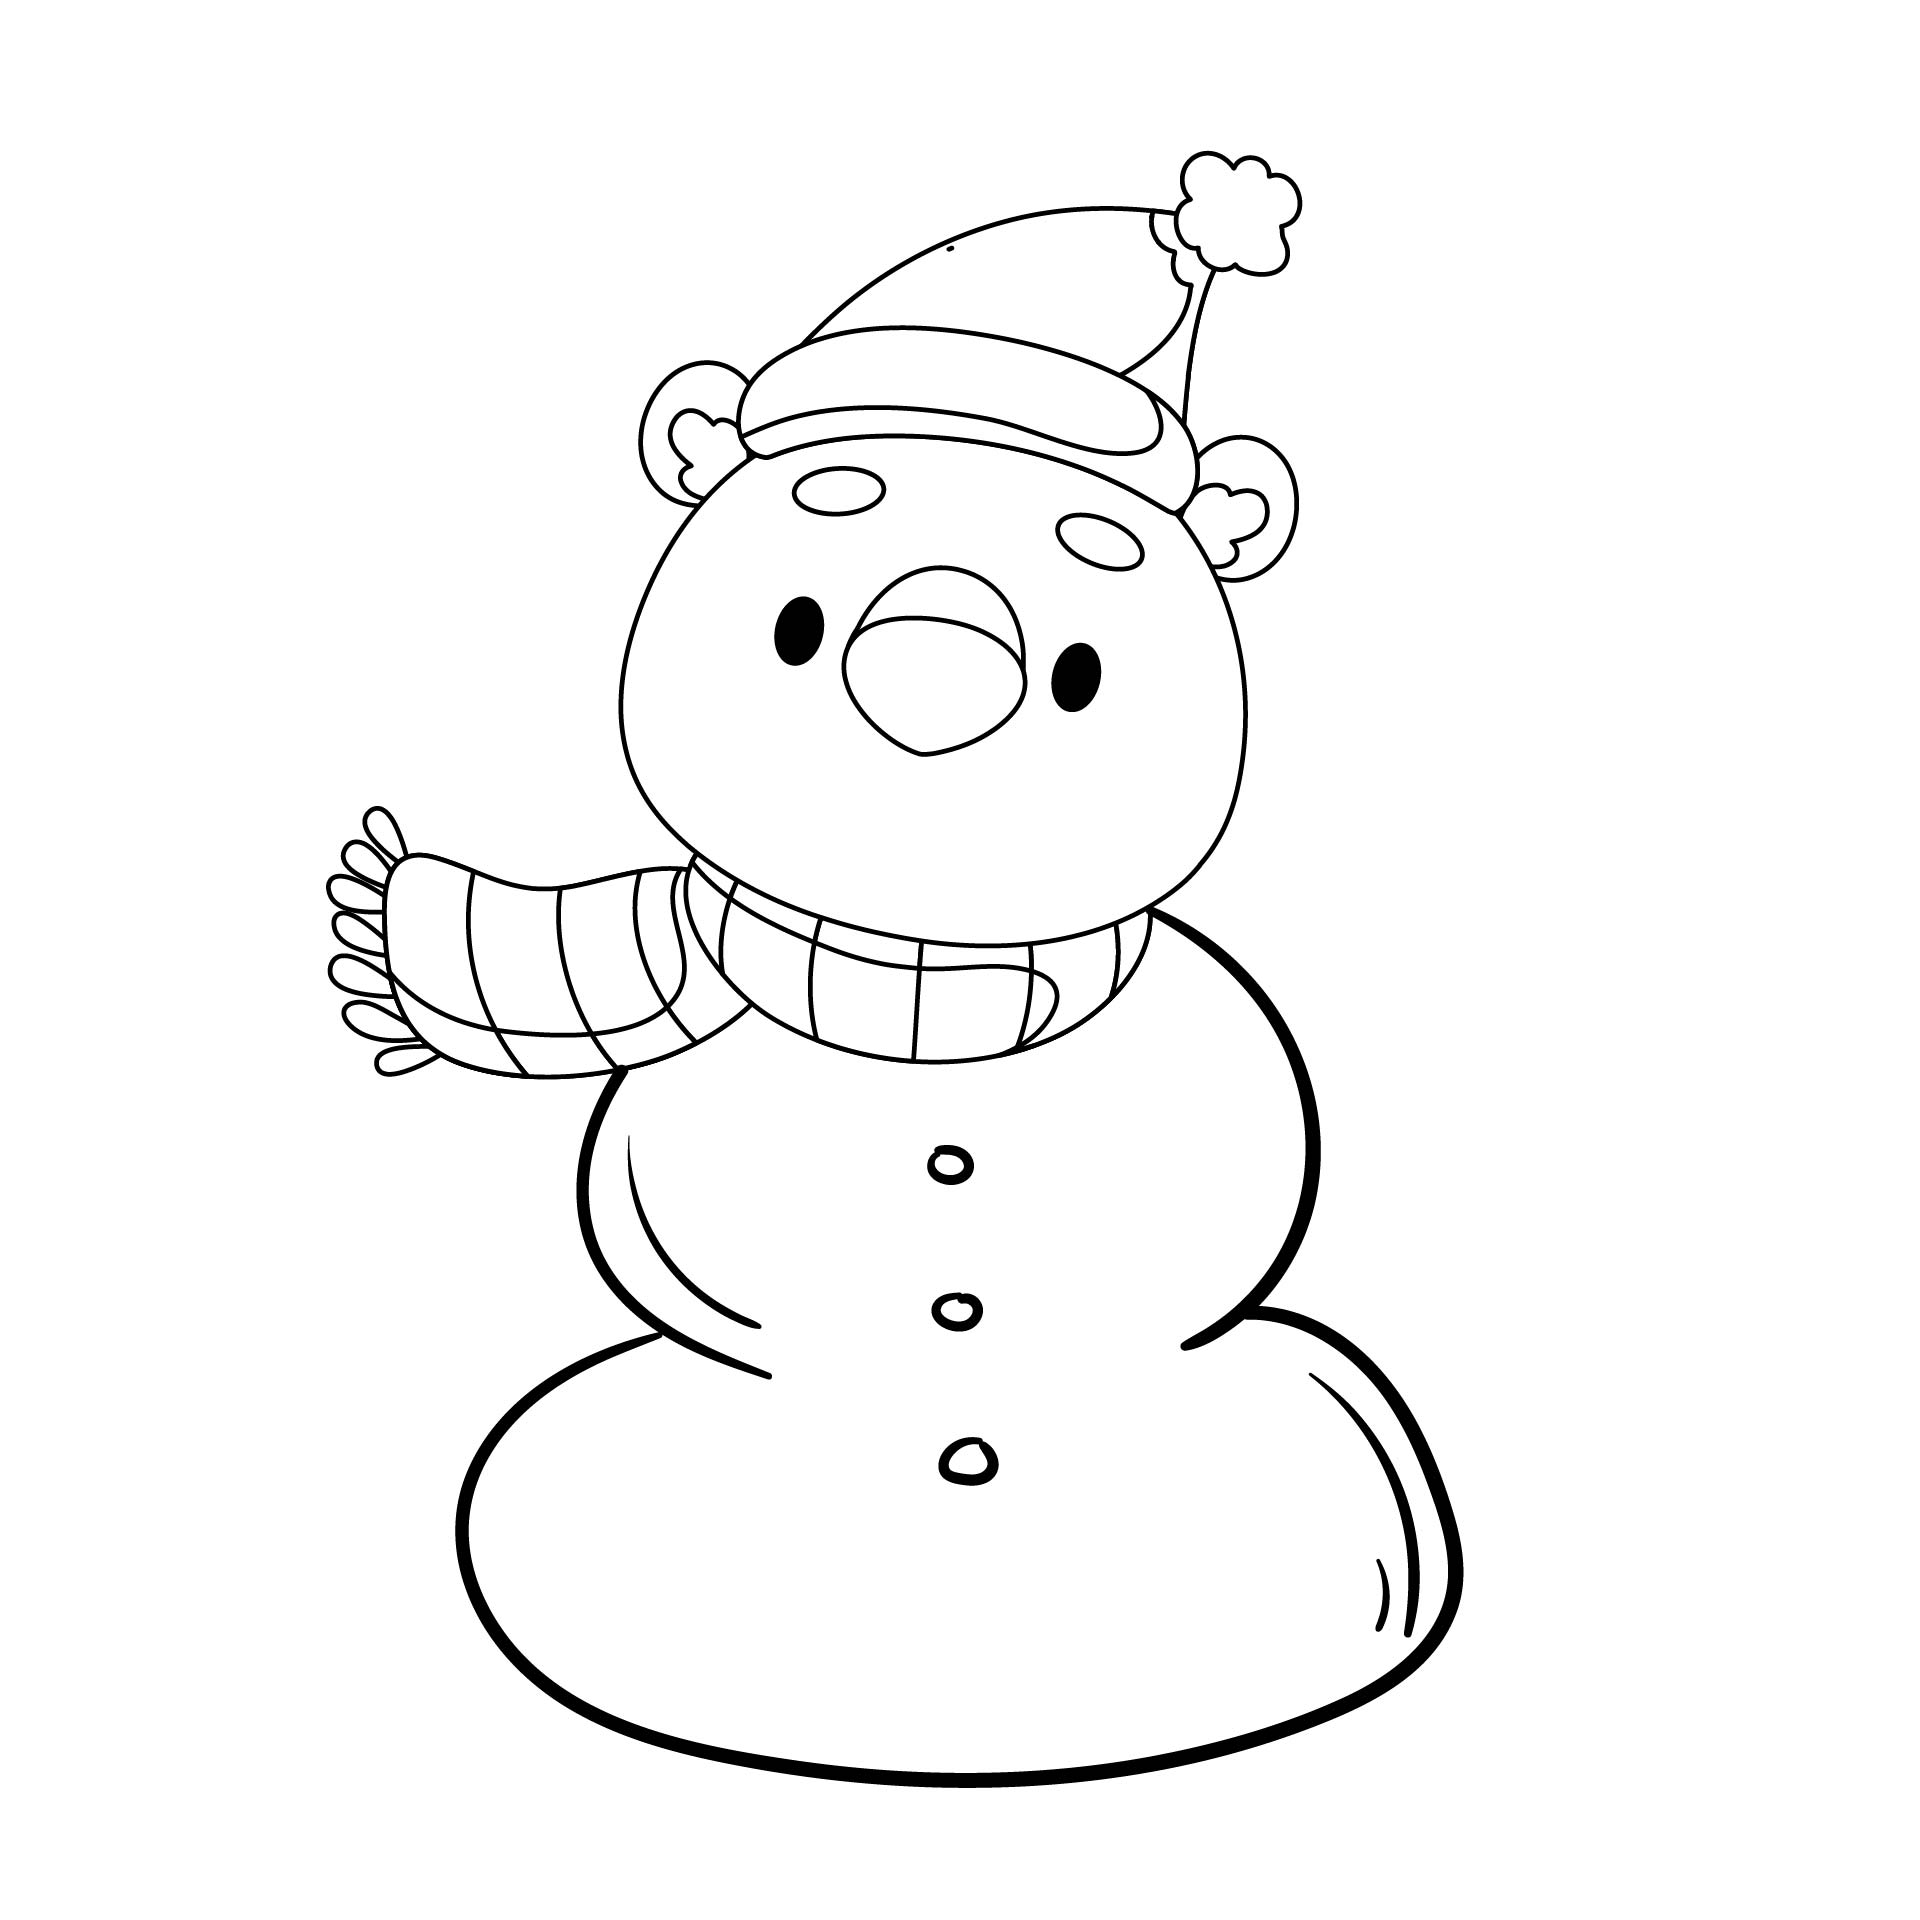  Printable Christmas Coloring Pages